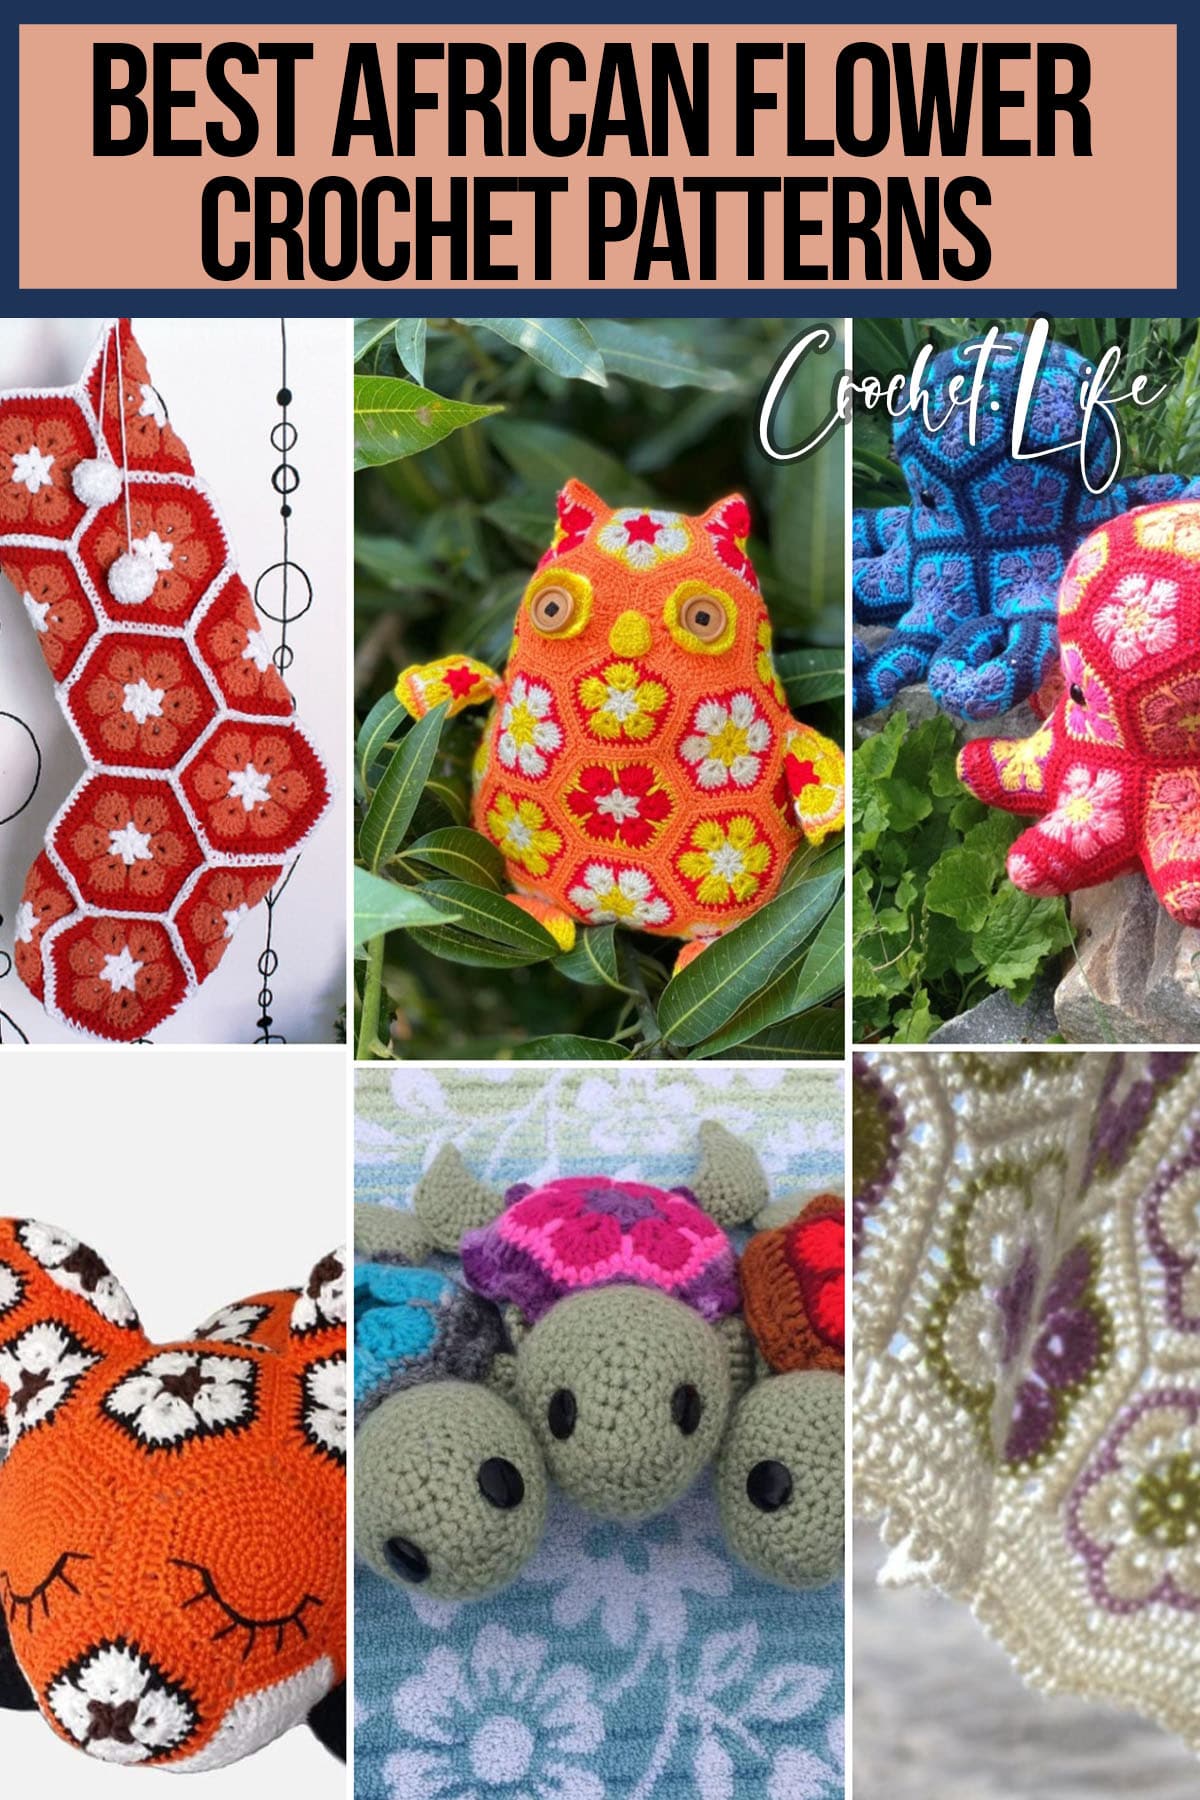 photo collage of crochet patterns for the african flower motif with text which reads best african flower crochet patterns